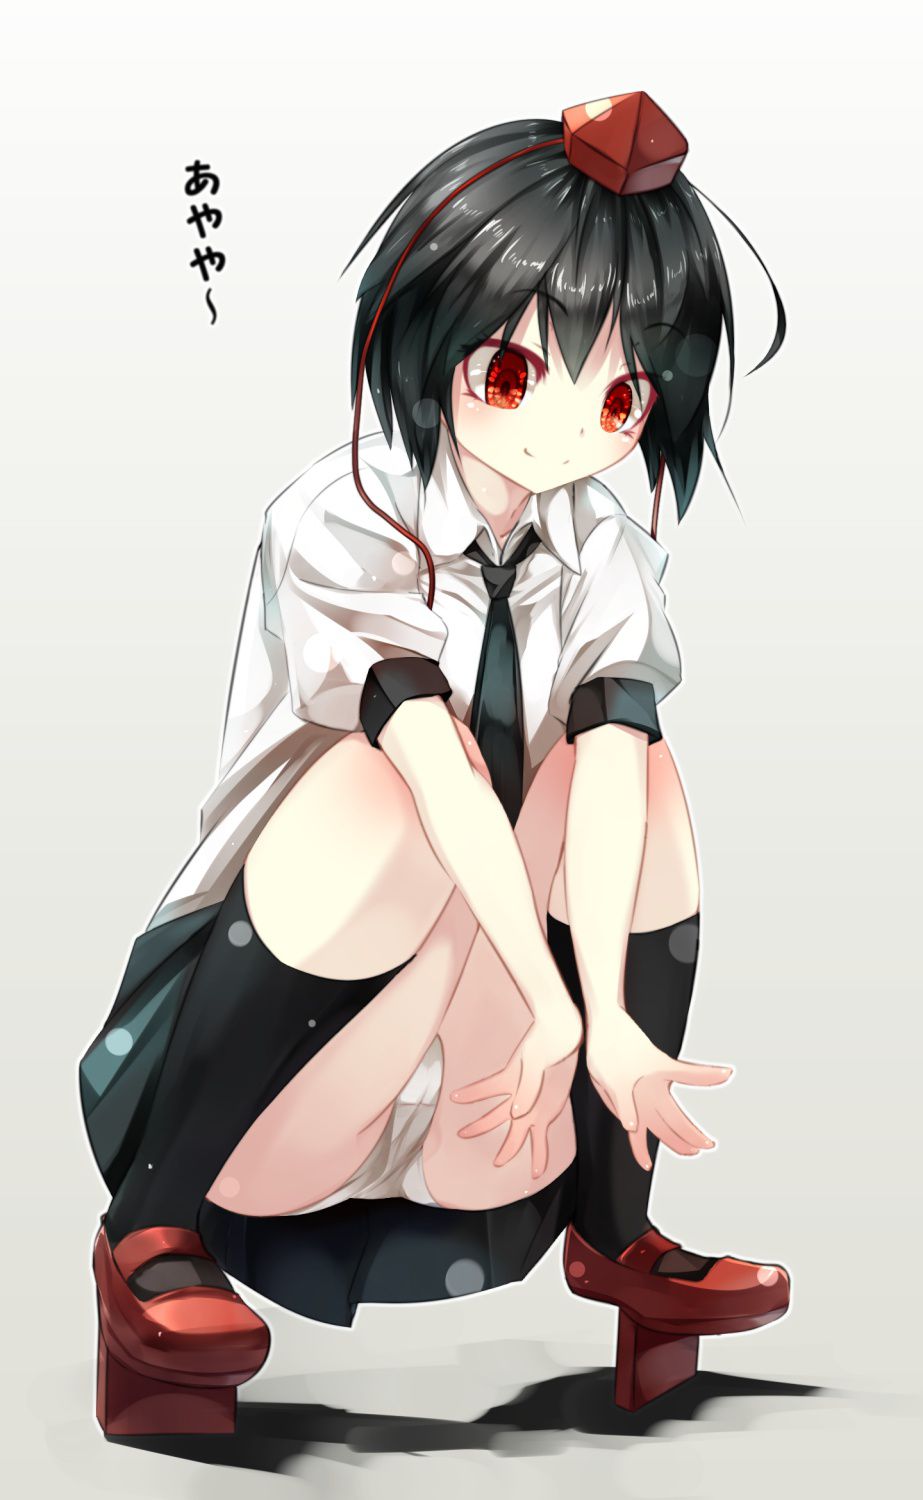 Picture of a girl squatting in a crouching skirt part 3 6